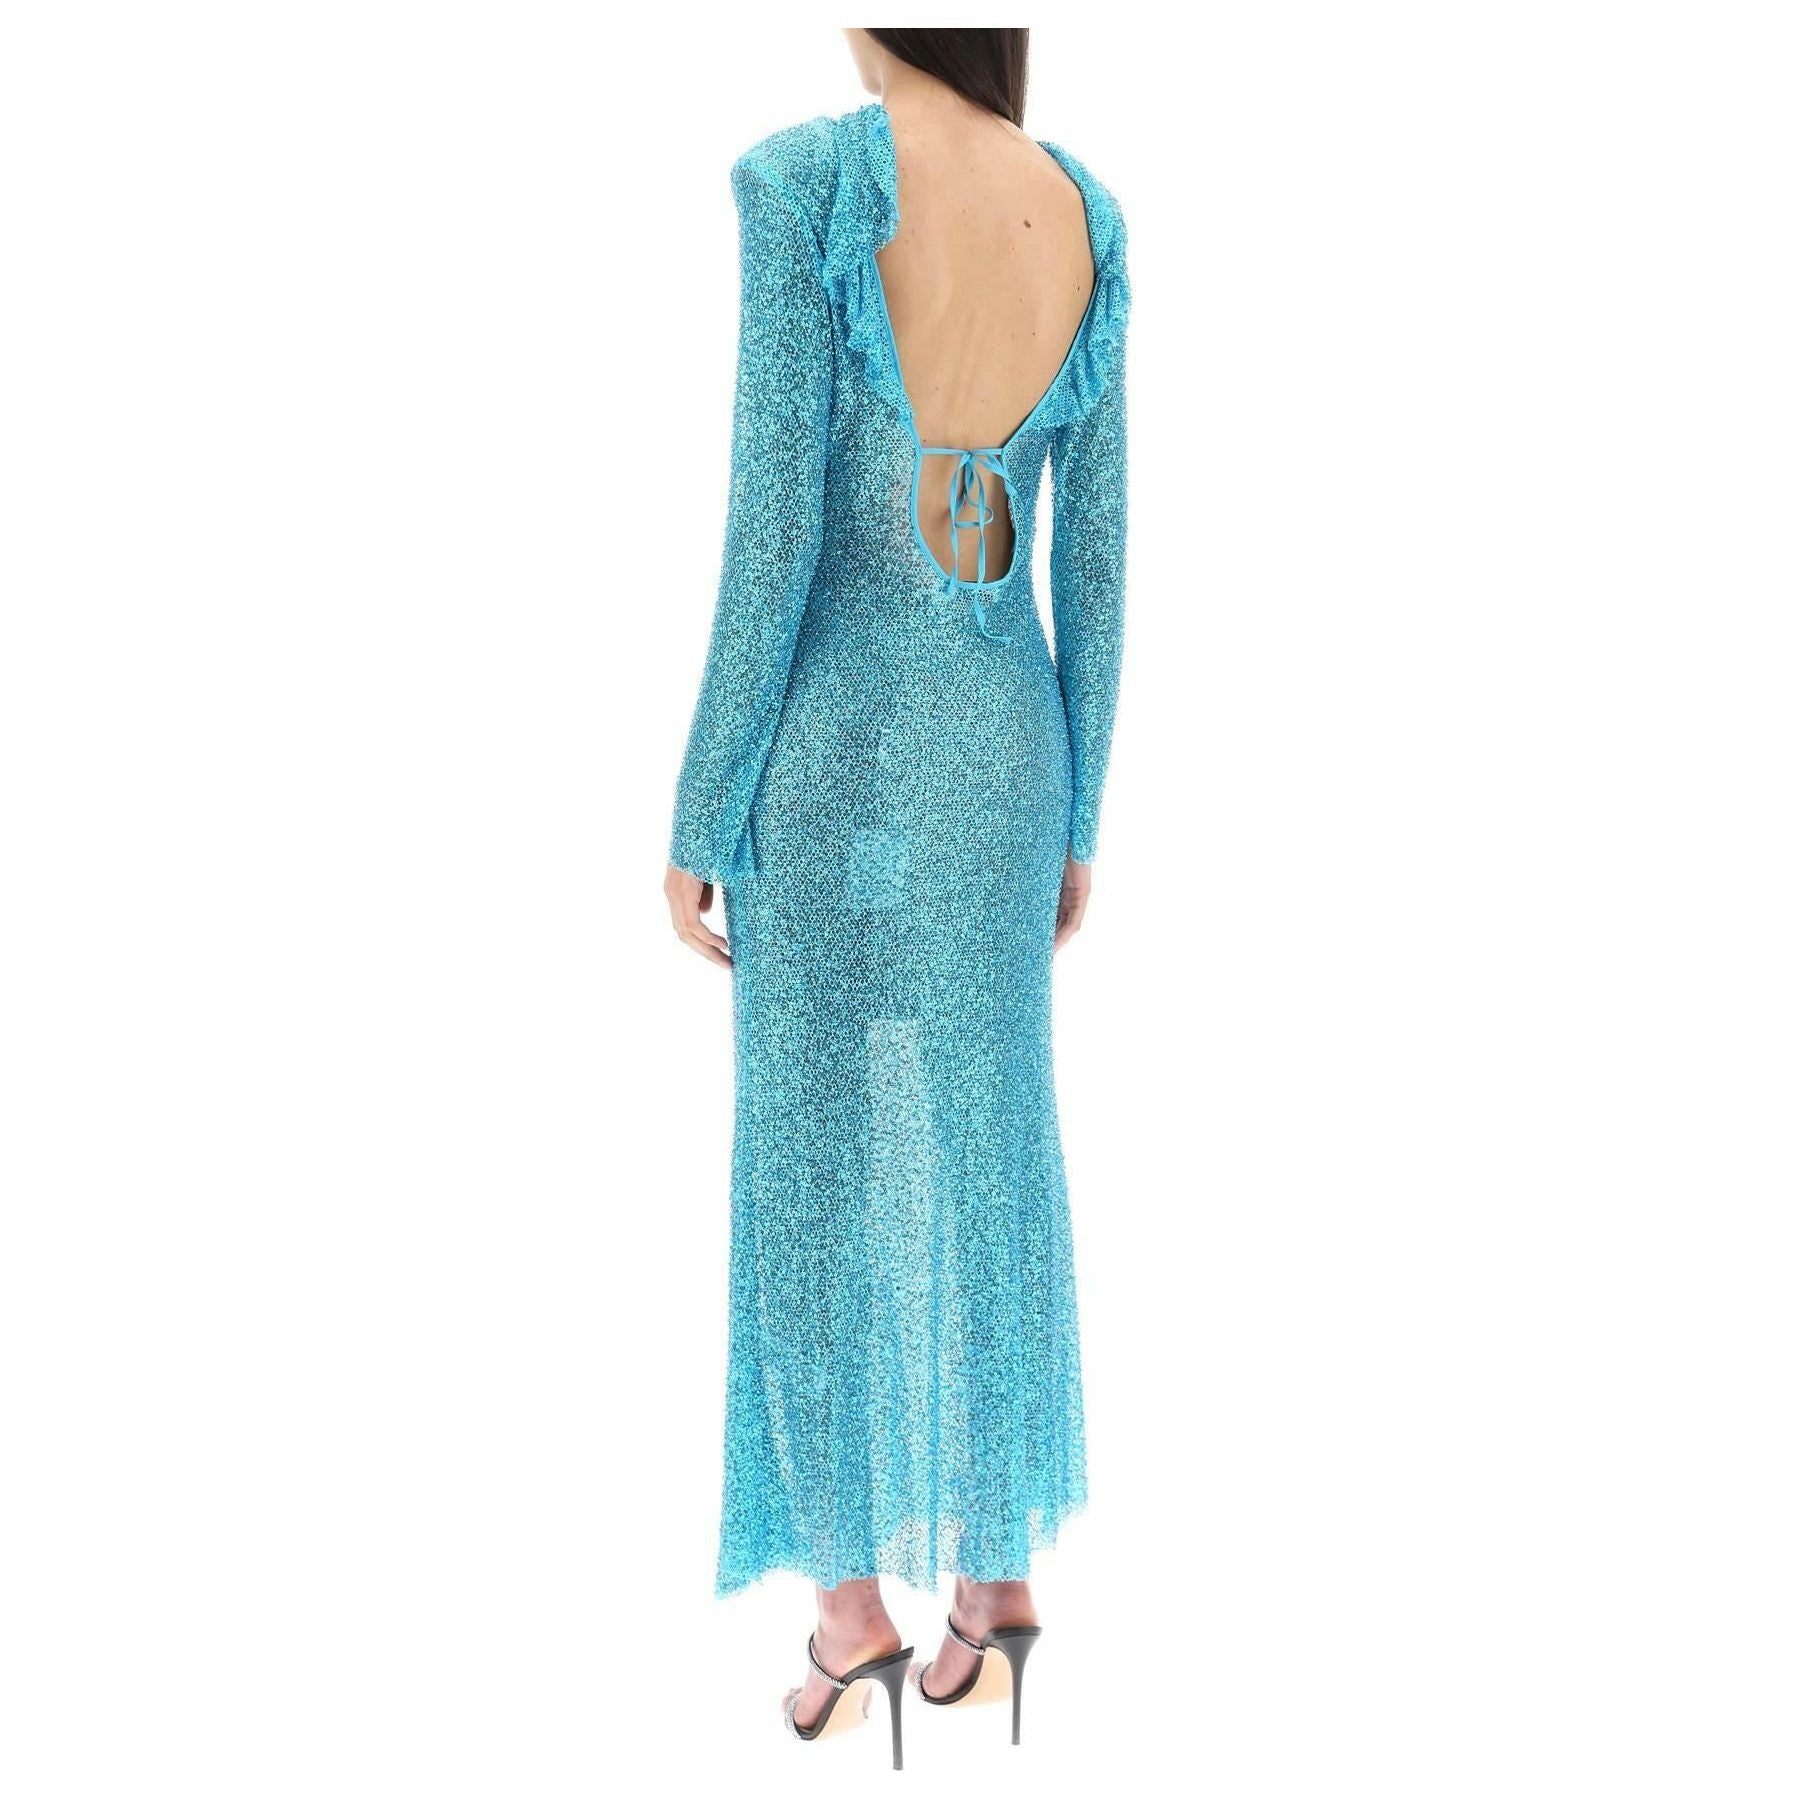 Long Sleeved Maxi Dress With Sequins And Beads SELF PORTRAIT JOHN JULIA.